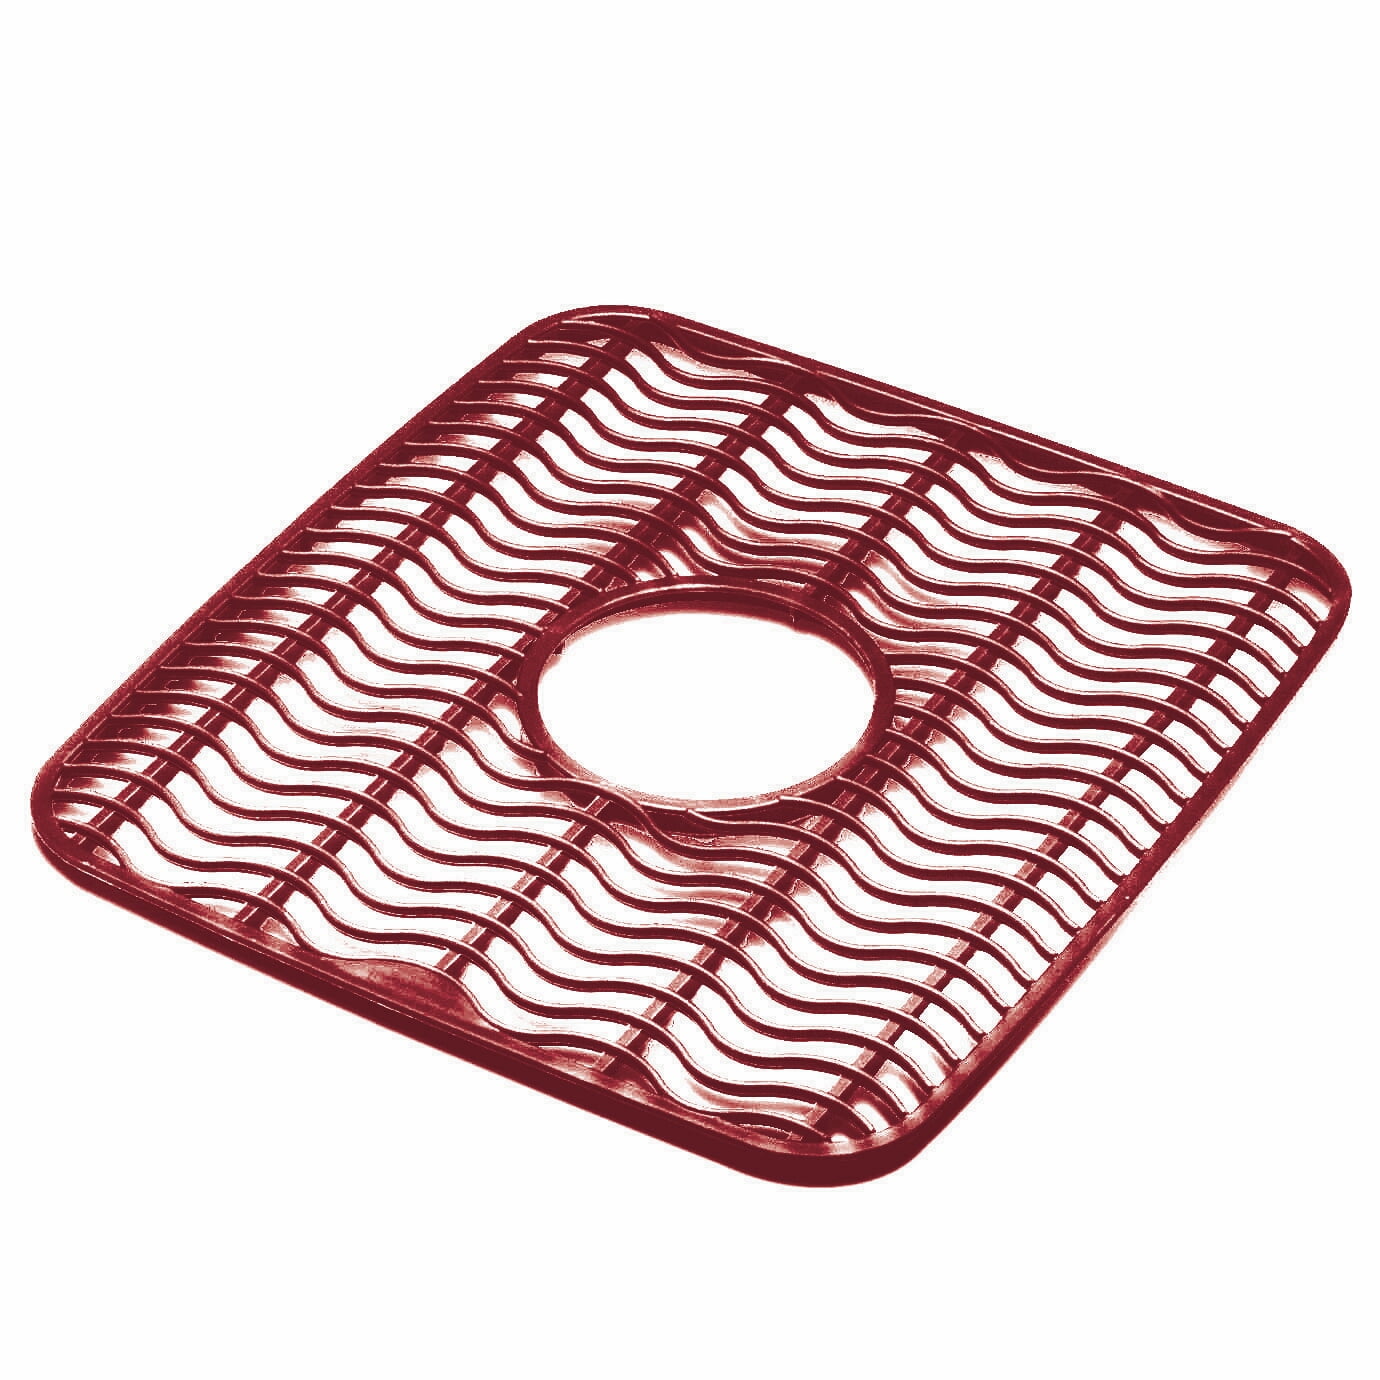 Rubbermaid Microban Sink Protector Mat - Sears Marketplace